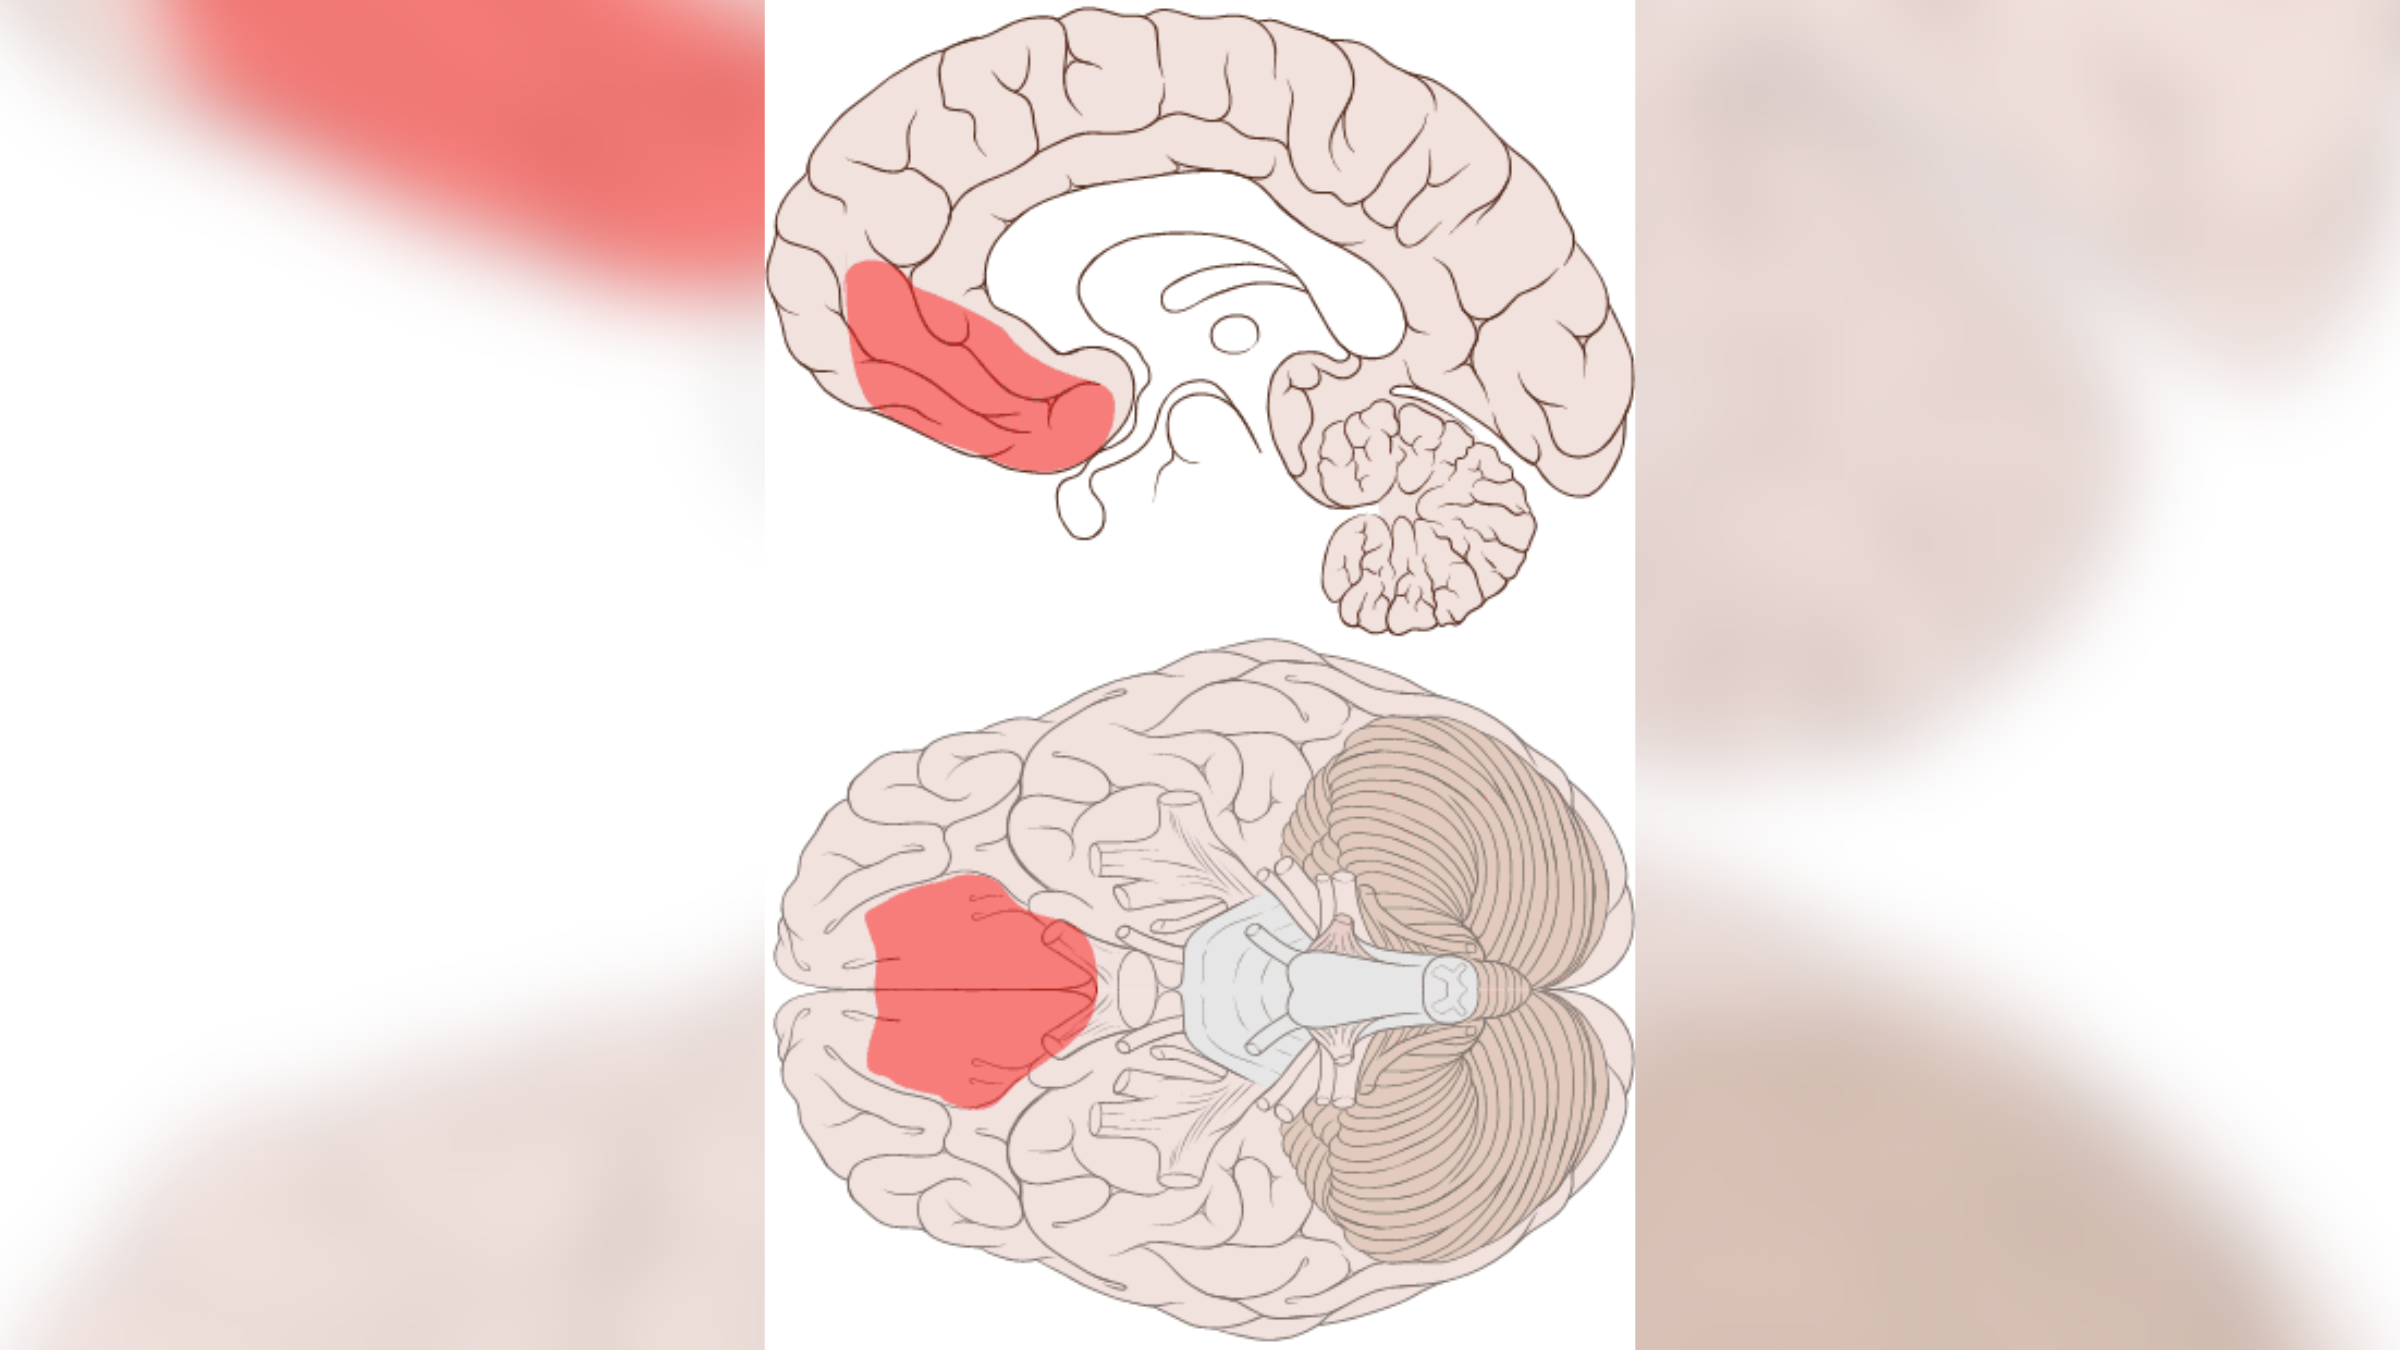 Medical illustration of the brain in black and white highlighting the location of the ventromedial prefrontal cortex in red